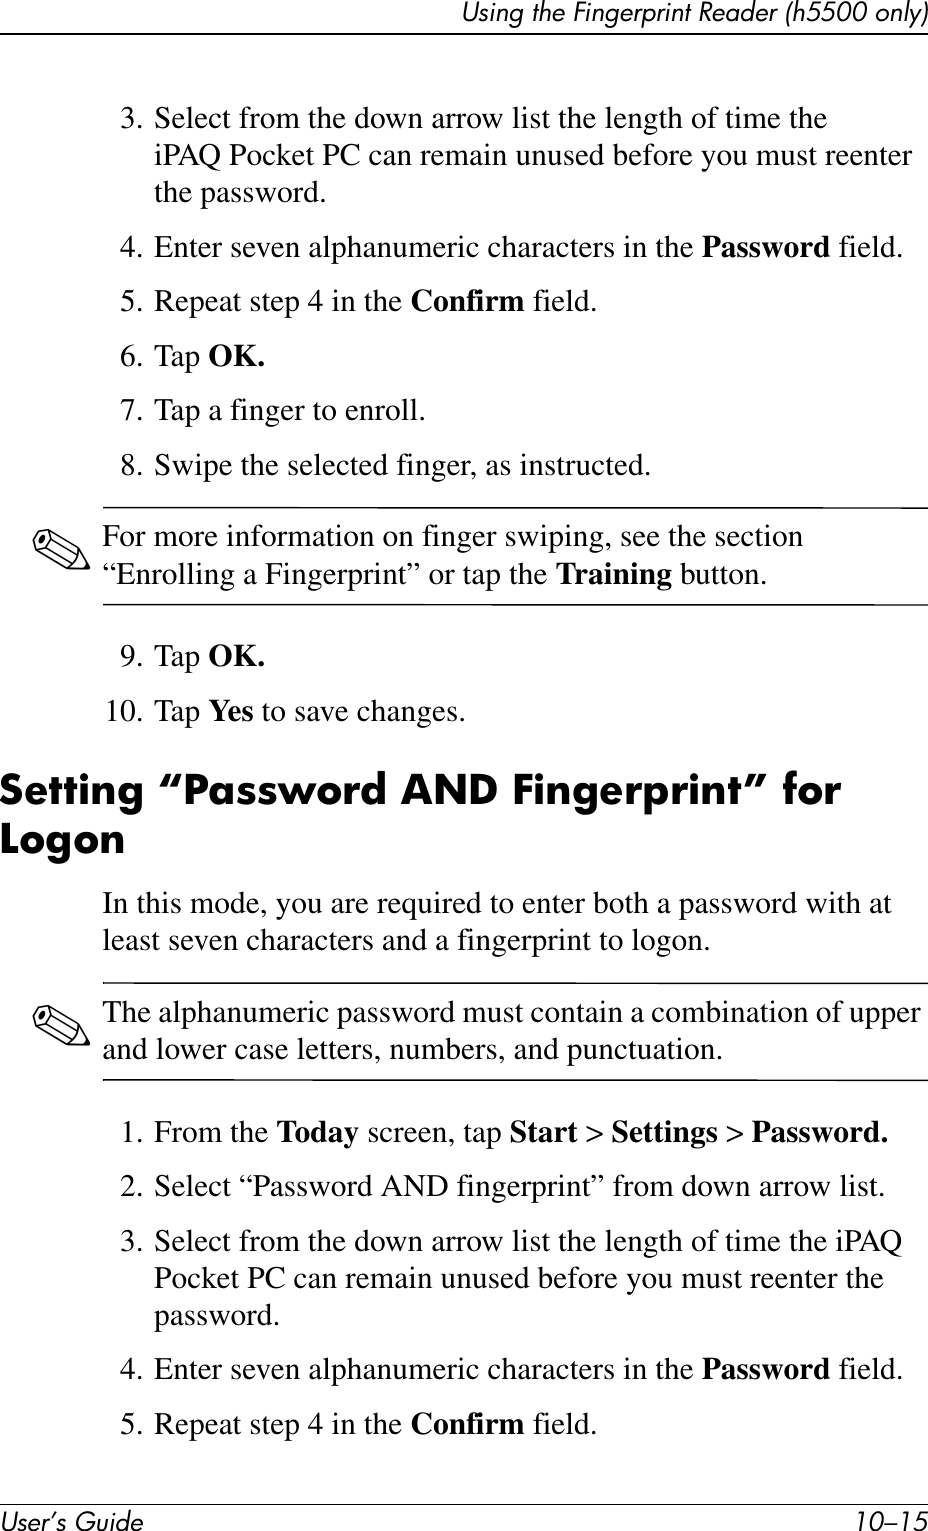 Using the Fingerprint Reader (h5500 only)User’s Guide 10–153. Select from the down arrow list the length of time the iPAQ Pocket PC can remain unused before you must reenter the password.4. Enter seven alphanumeric characters in the Password field.5. Repeat step 4 in the Confirm field.6. Tap OK.7. Tap a finger to enroll.8. Swipe the selected finger, as instructed. ✎For more information on finger swiping, see the section “Enrolling a Fingerprint” or tap the Training button.9. Tap OK.10. Tap Ye s  to save changes.Setting “Password AND Fingerprint” for LogonIn this mode, you are required to enter both a password with at least seven characters and a fingerprint to logon.✎The alphanumeric password must contain a combination of upper and lower case letters, numbers, and punctuation.1. From the Today screen, tap Start &gt; Settings &gt; Password.2. Select “Password AND fingerprint” from down arrow list.3. Select from the down arrow list the length of time the iPAQ Pocket PC can remain unused before you must reenter the password.4. Enter seven alphanumeric characters in the Password field.5. Repeat step 4 in the Confirm field.